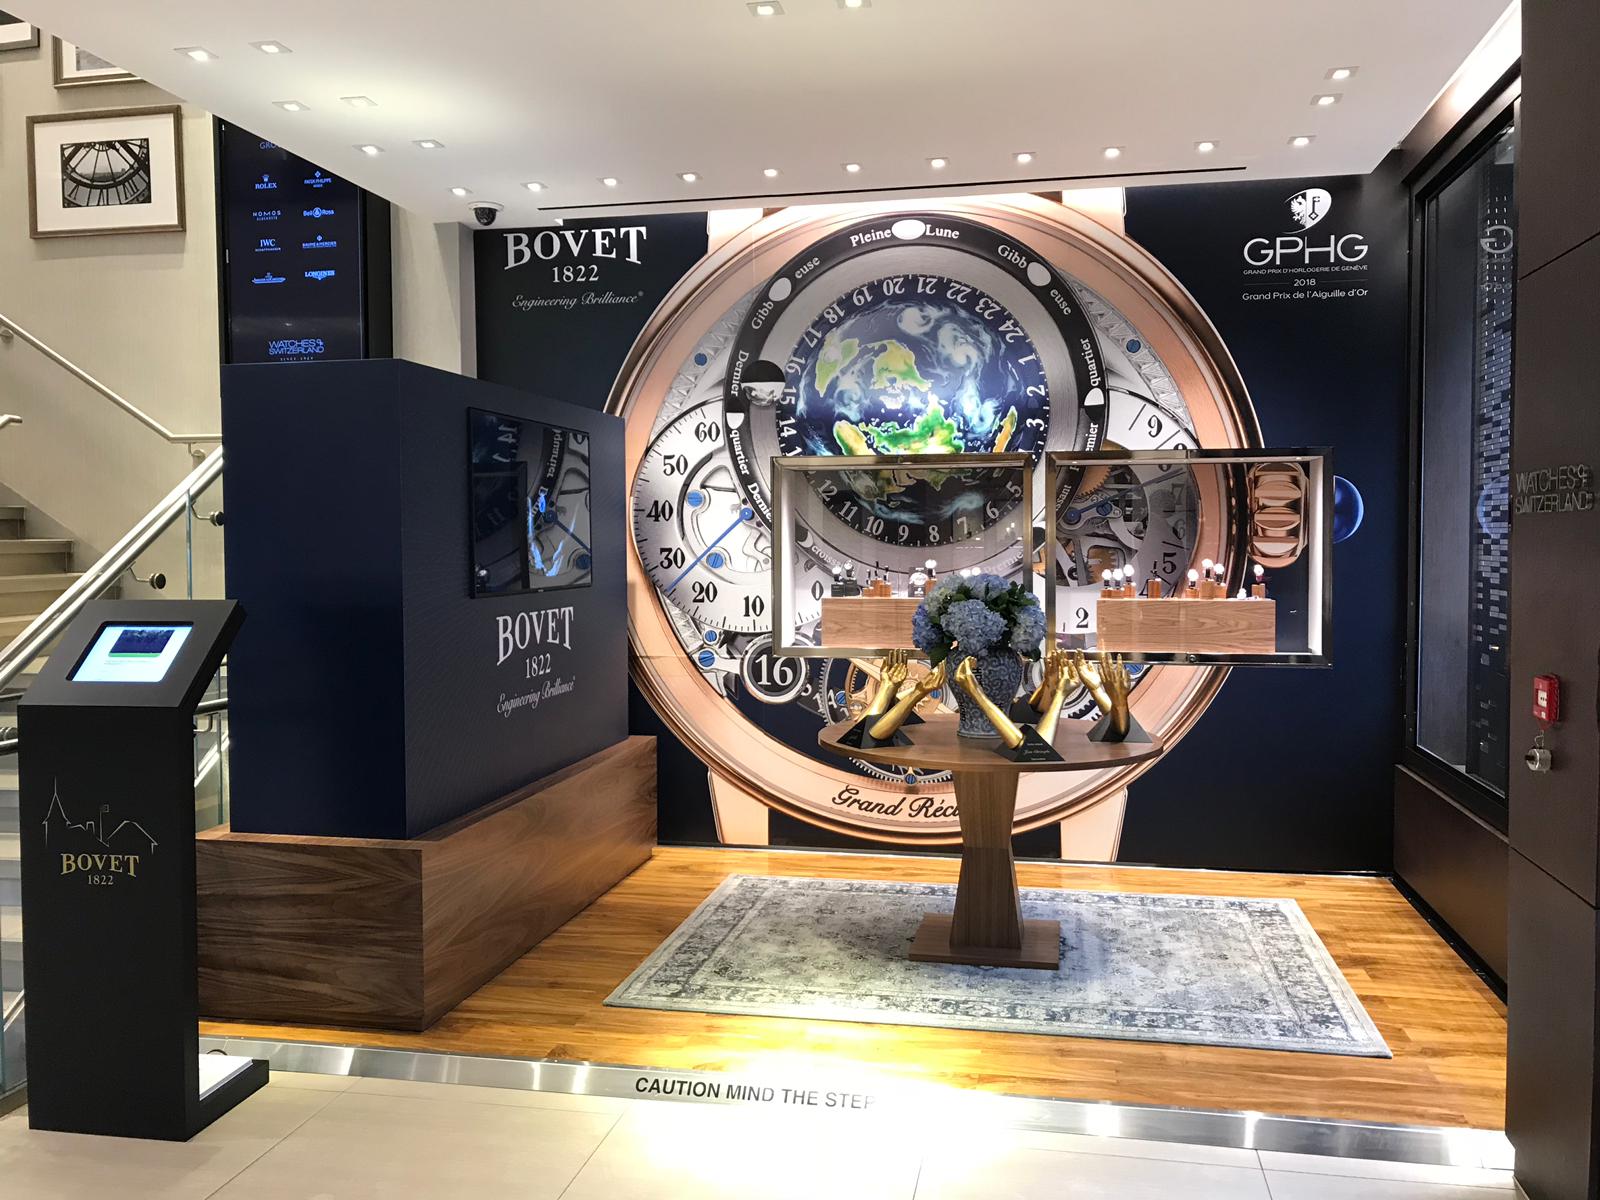 Bovet pop up in wos oxford street